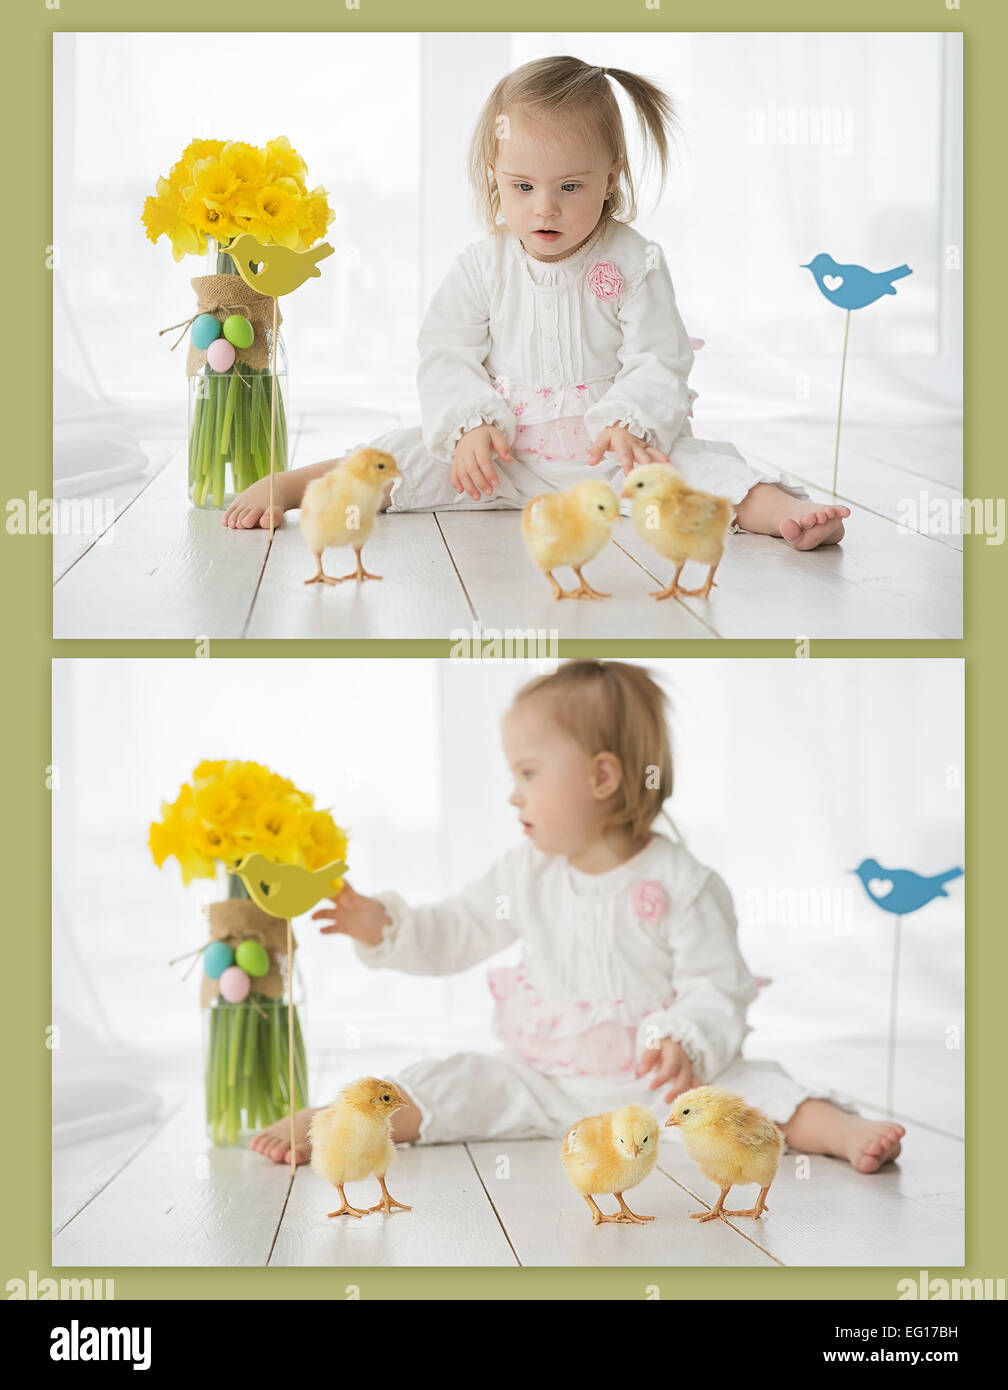 collage of photos of the girl with Down syndrome and chickens Stock Photo